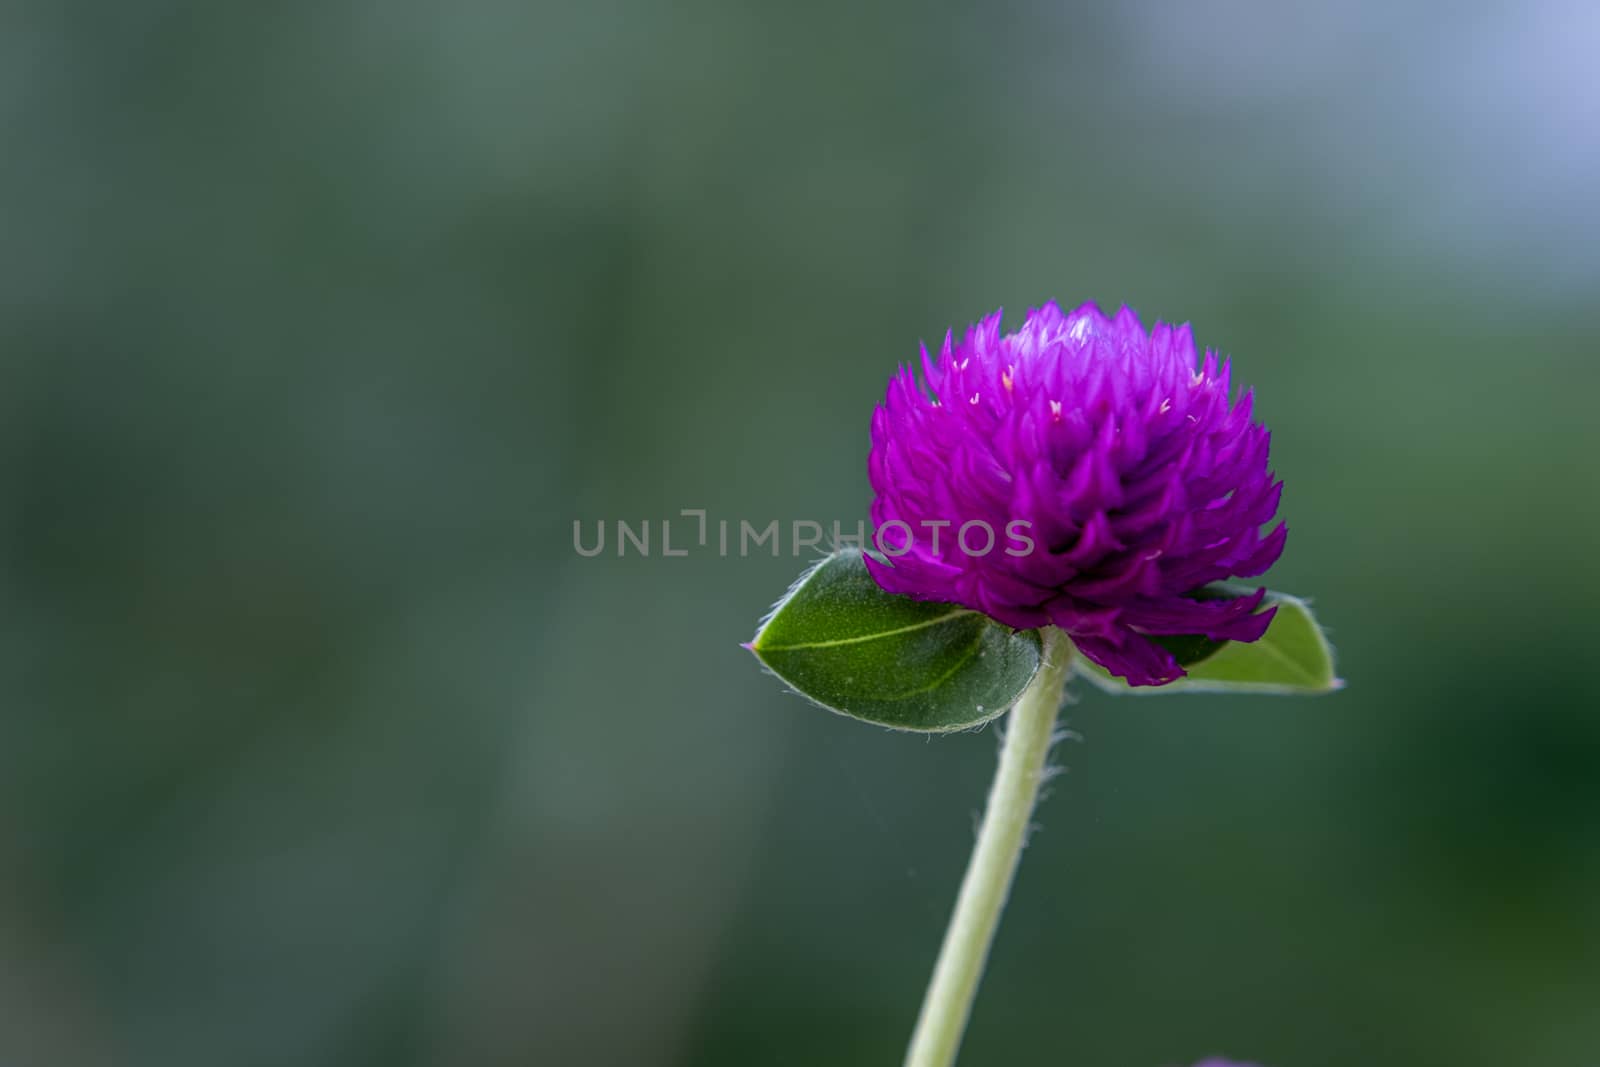 A Globe Amaranth / Bachelor Button. Flowers are magenta, white, pink and light purple. Popular plant as a home decoration. by peerapixs